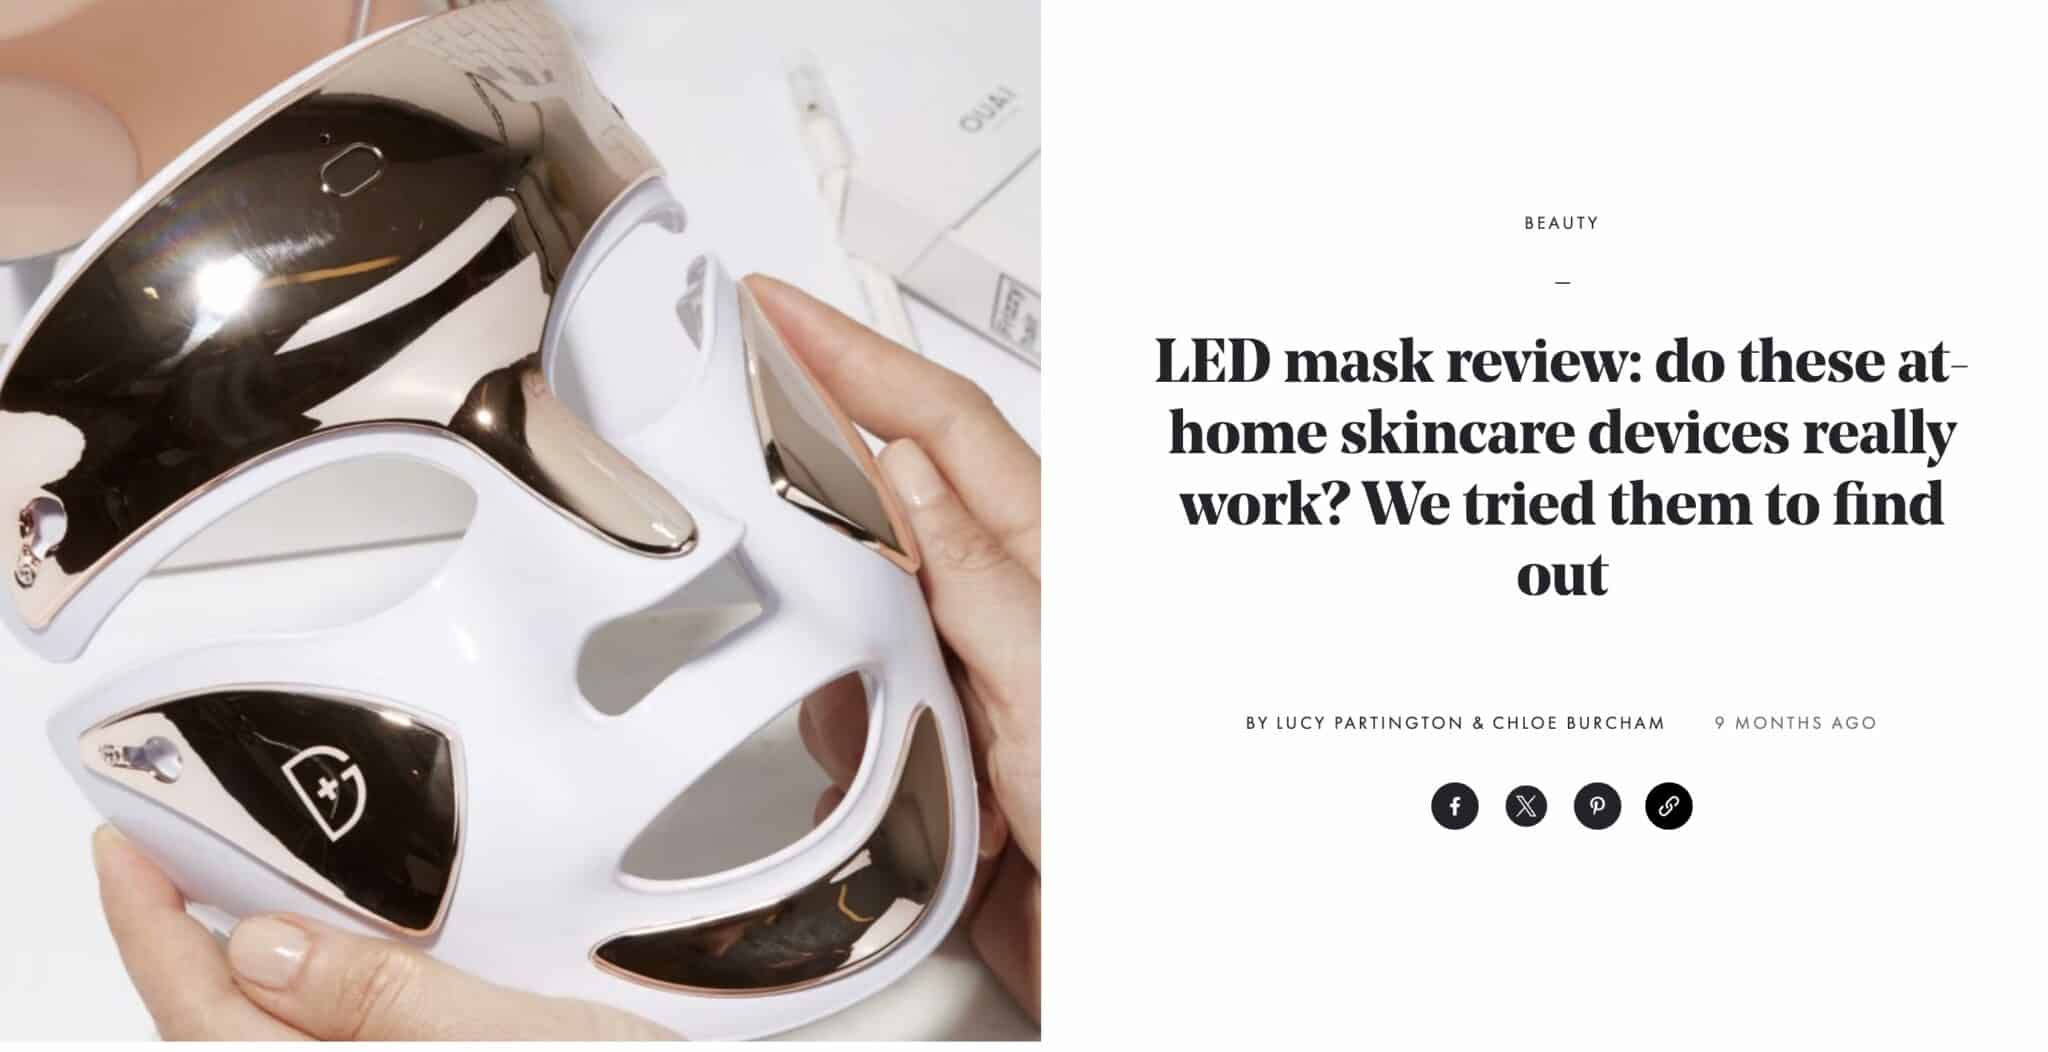 the beauty magazine Stylist actually invited three women to test the effectiveness of LED masks